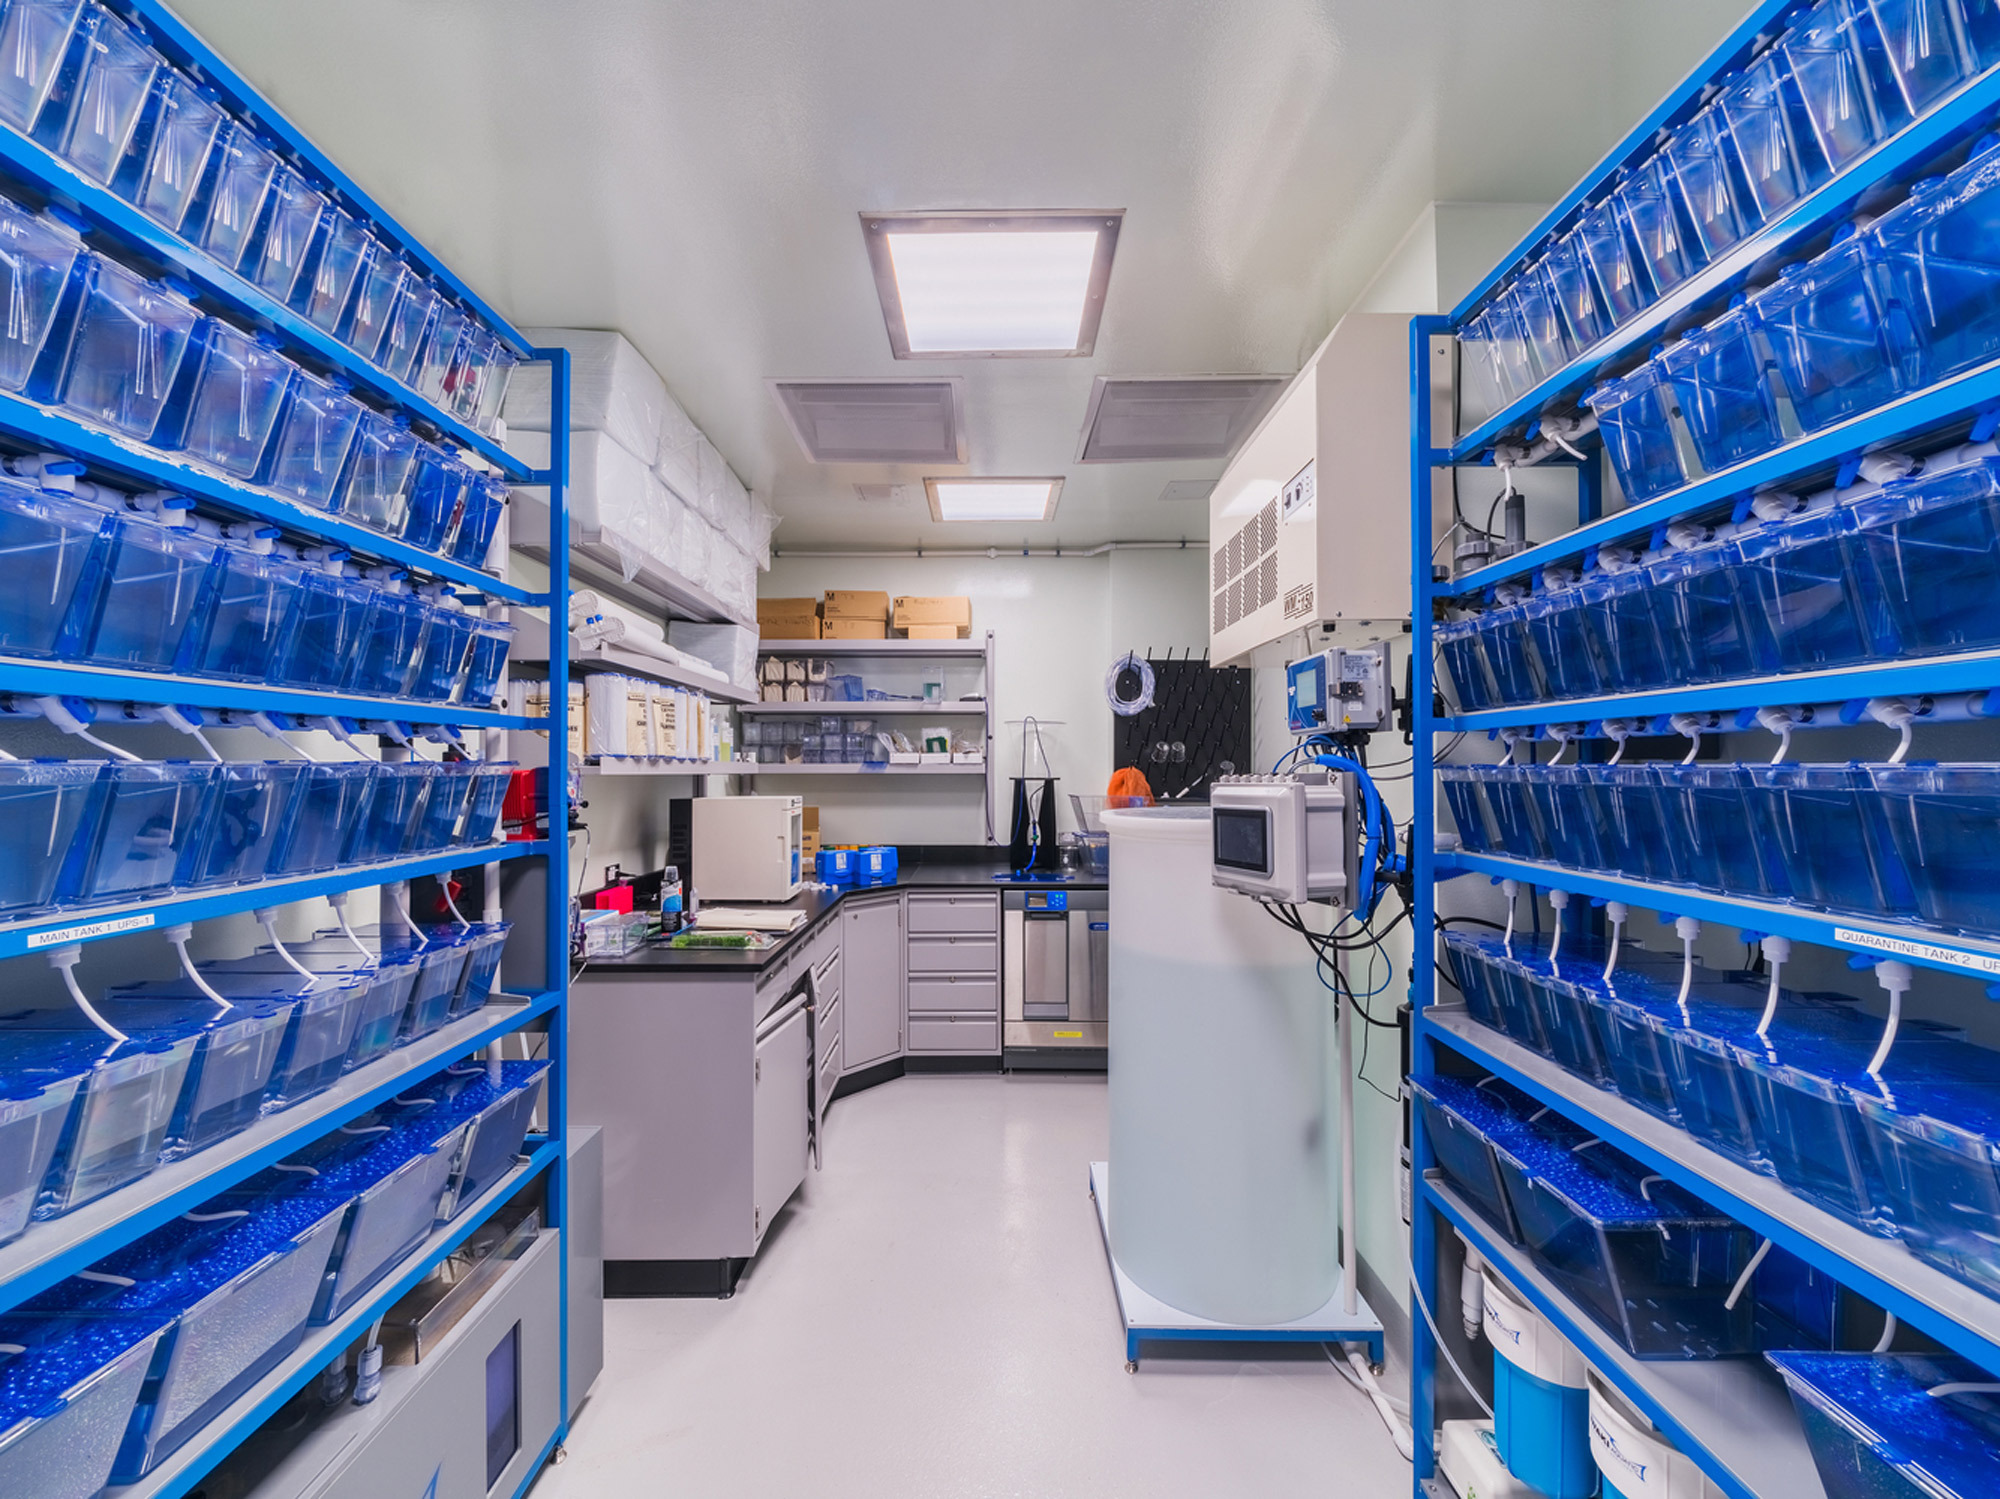 A meticulously organized laboratory interior with vibrant blue storage bins on steel shelving units, durable epoxy resin countertops, and state-of-the-art equipment ensuring a sterile and efficient research environment.